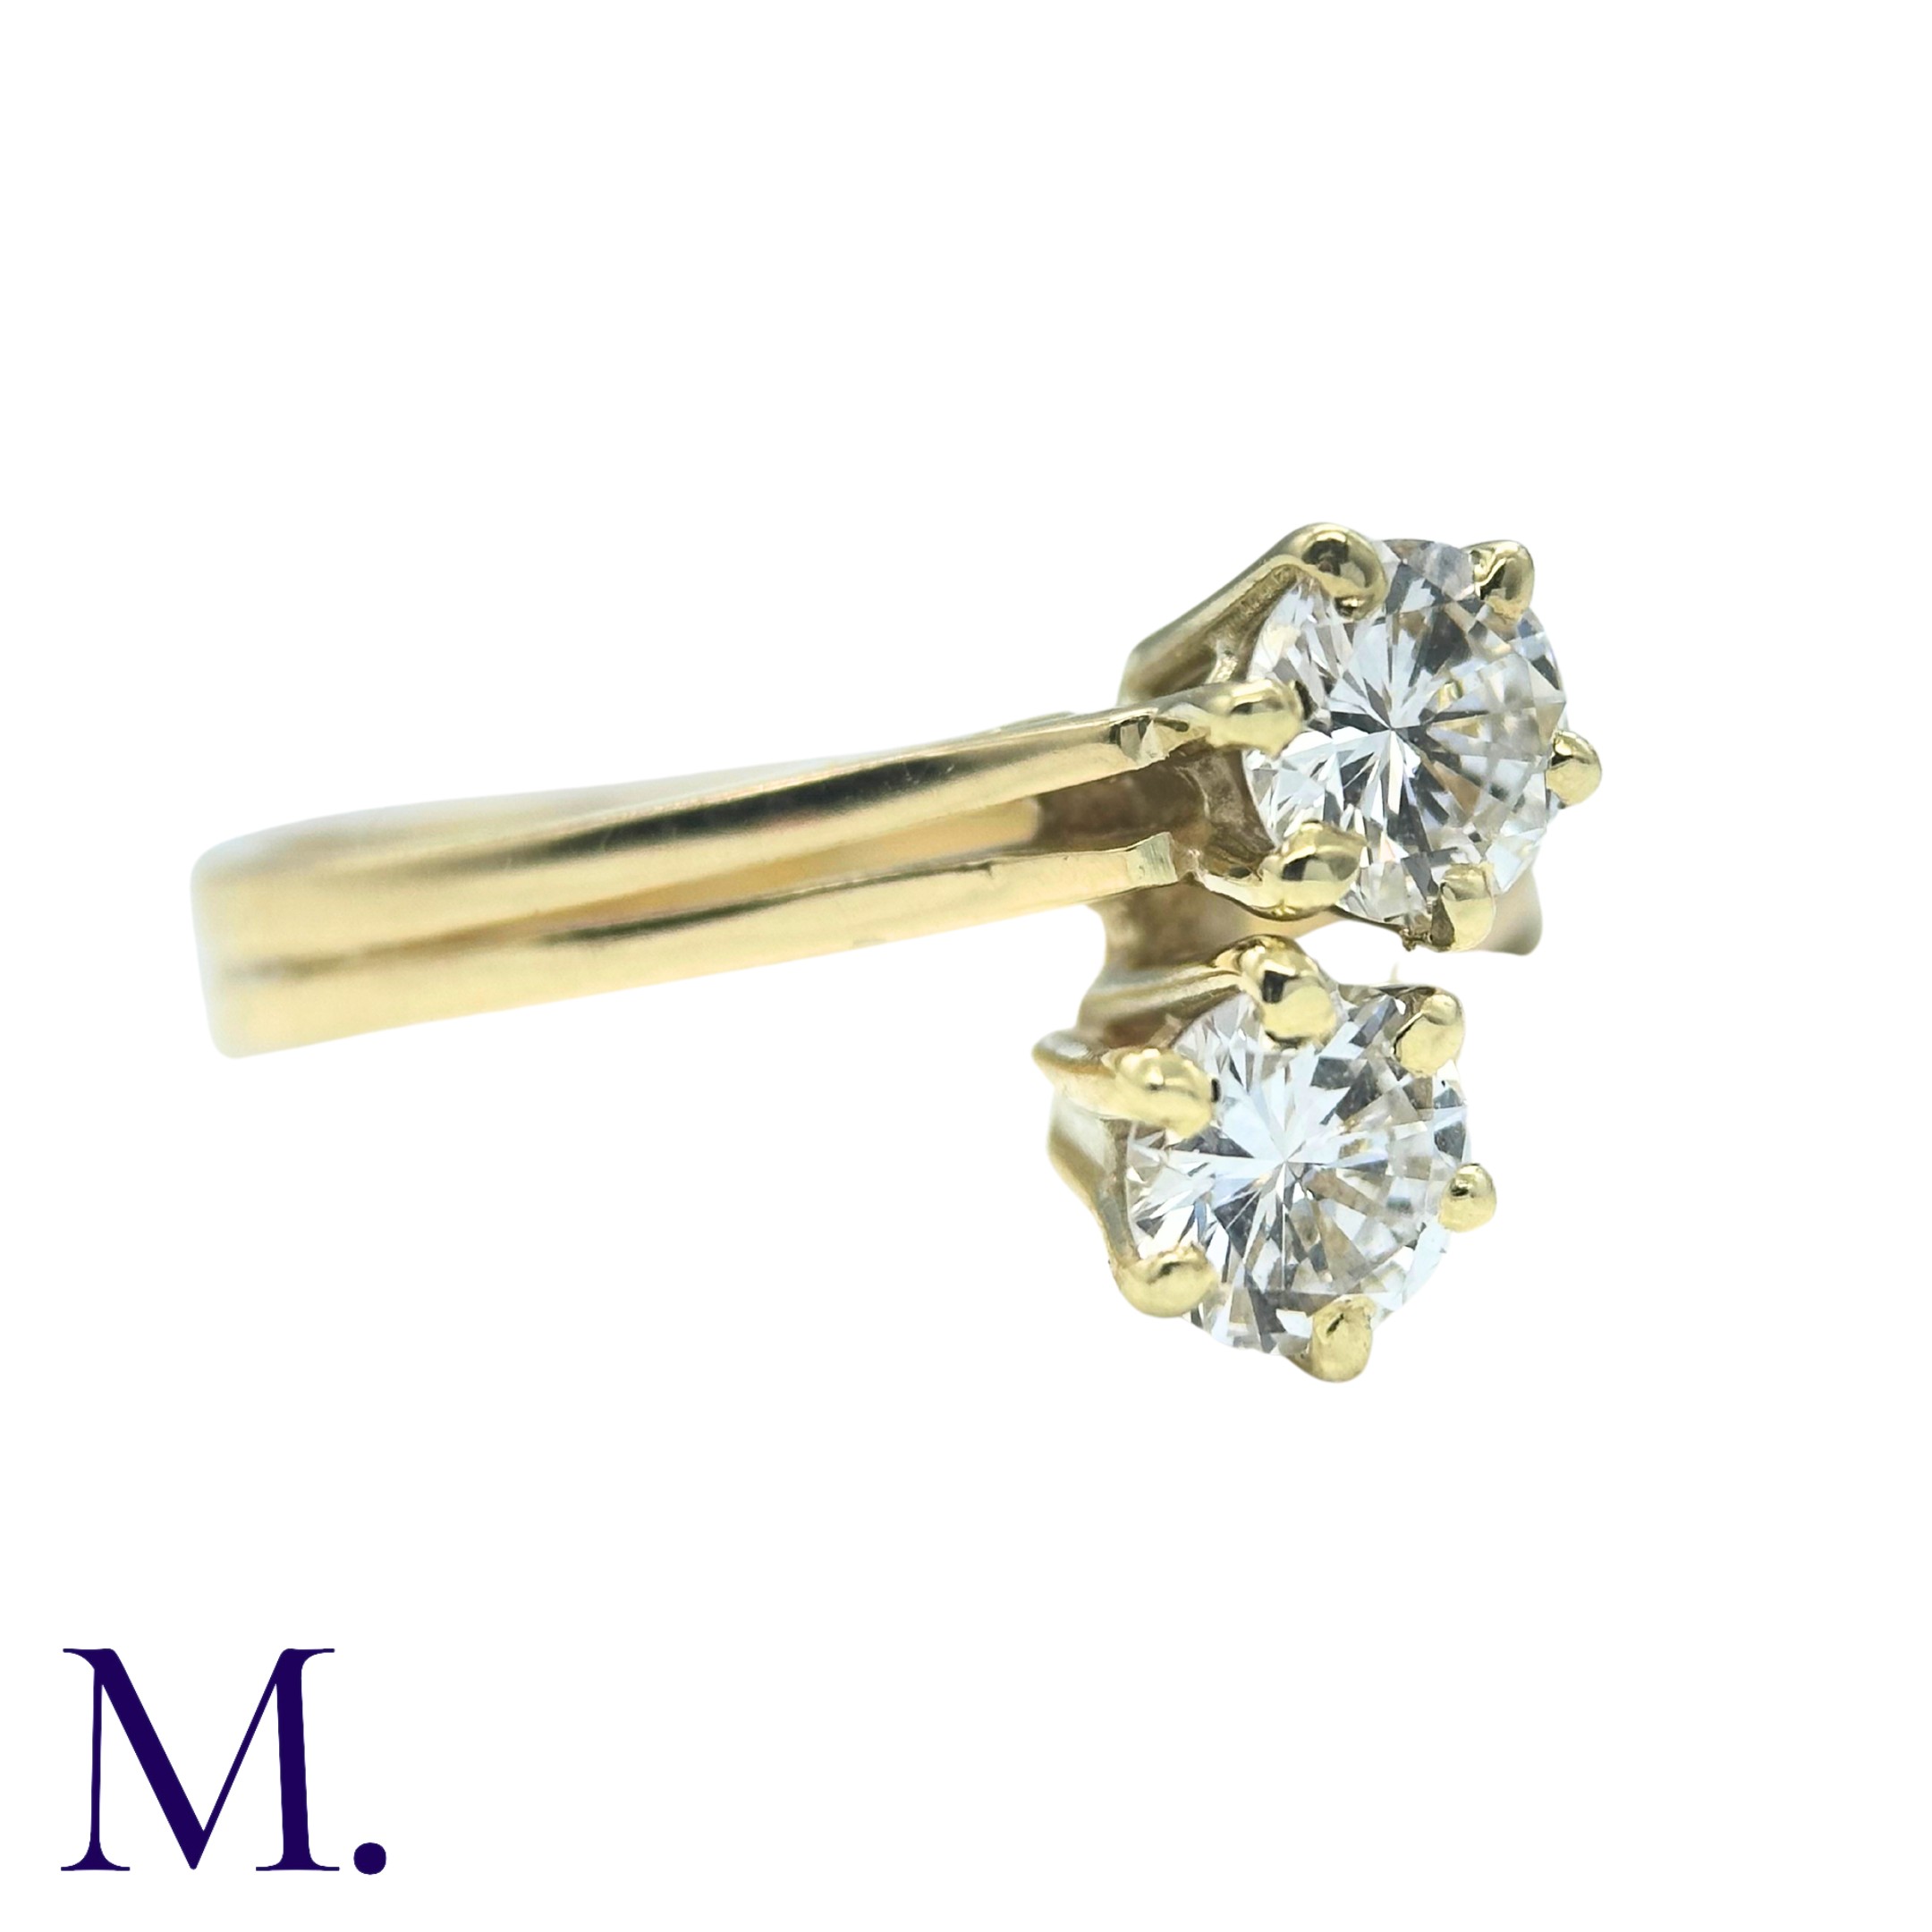 A Diamond 2-Stone Crossover Ring in 18K yellow gold, set with two round cut diamonds weighing - Image 3 of 4